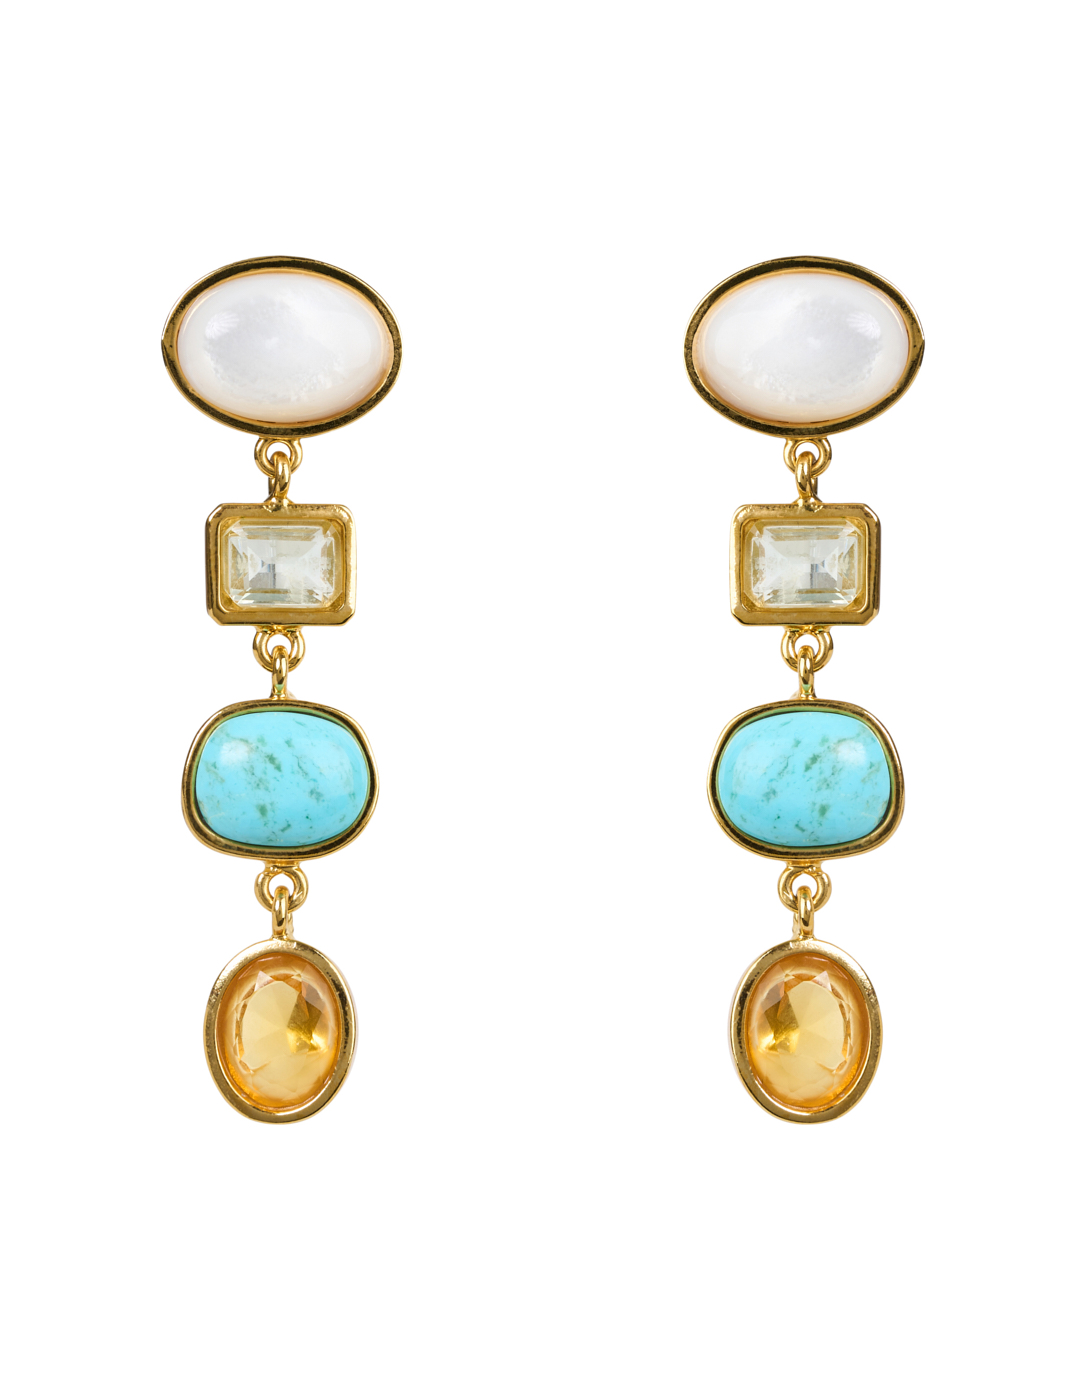 Lizzie Fortunato Jewels - Here's a bit of happiness for you